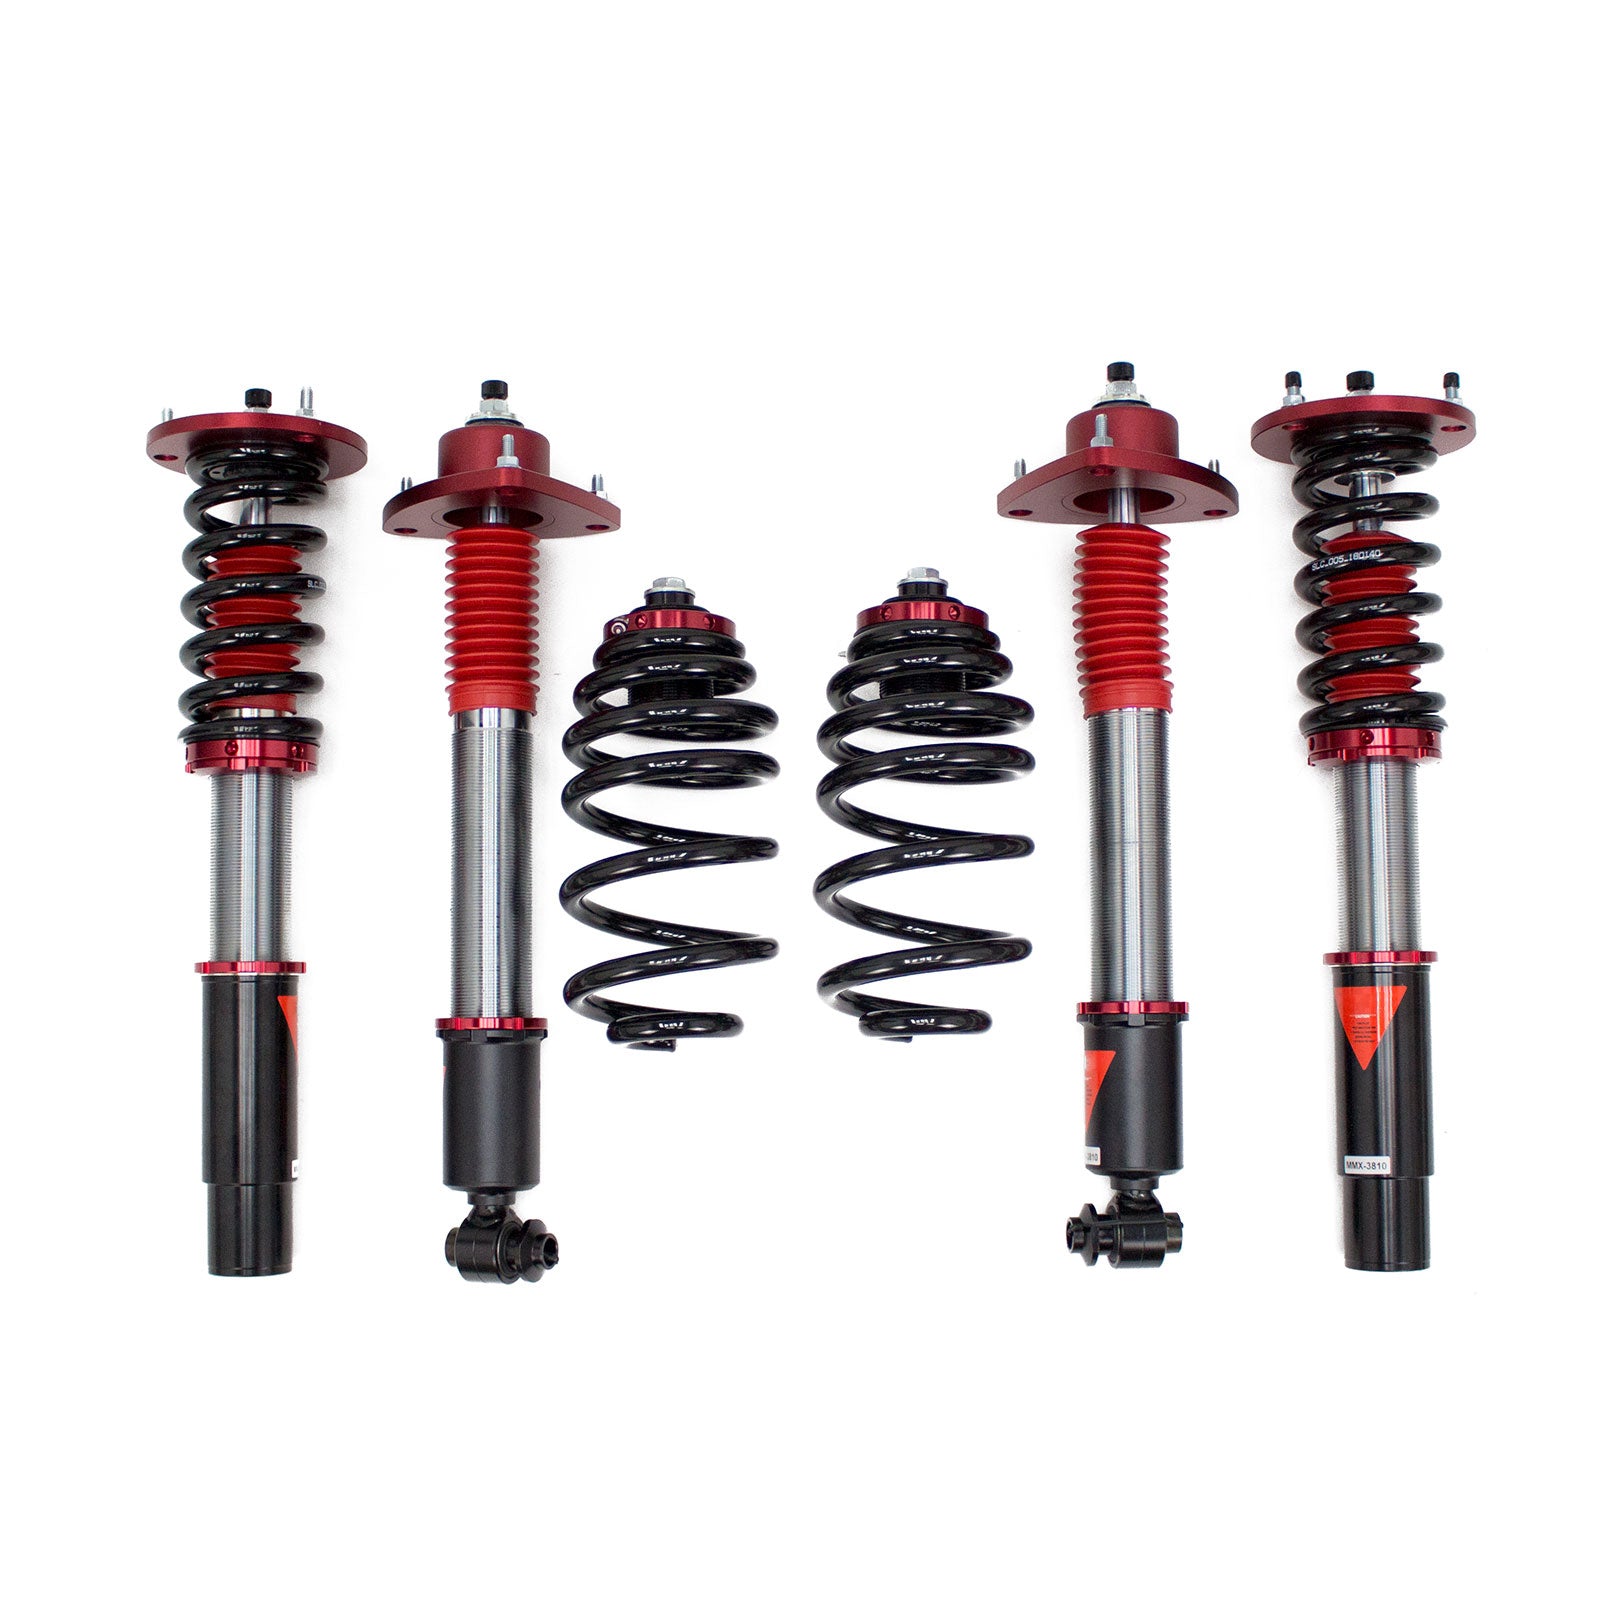 MMX3810 MAXX Coilovers Lowering Kit, Fully Adjustable, Ride Height, 40 Clicks Rebound Settings, BMW X5(F15) sDrive/xDrive 2014+UP